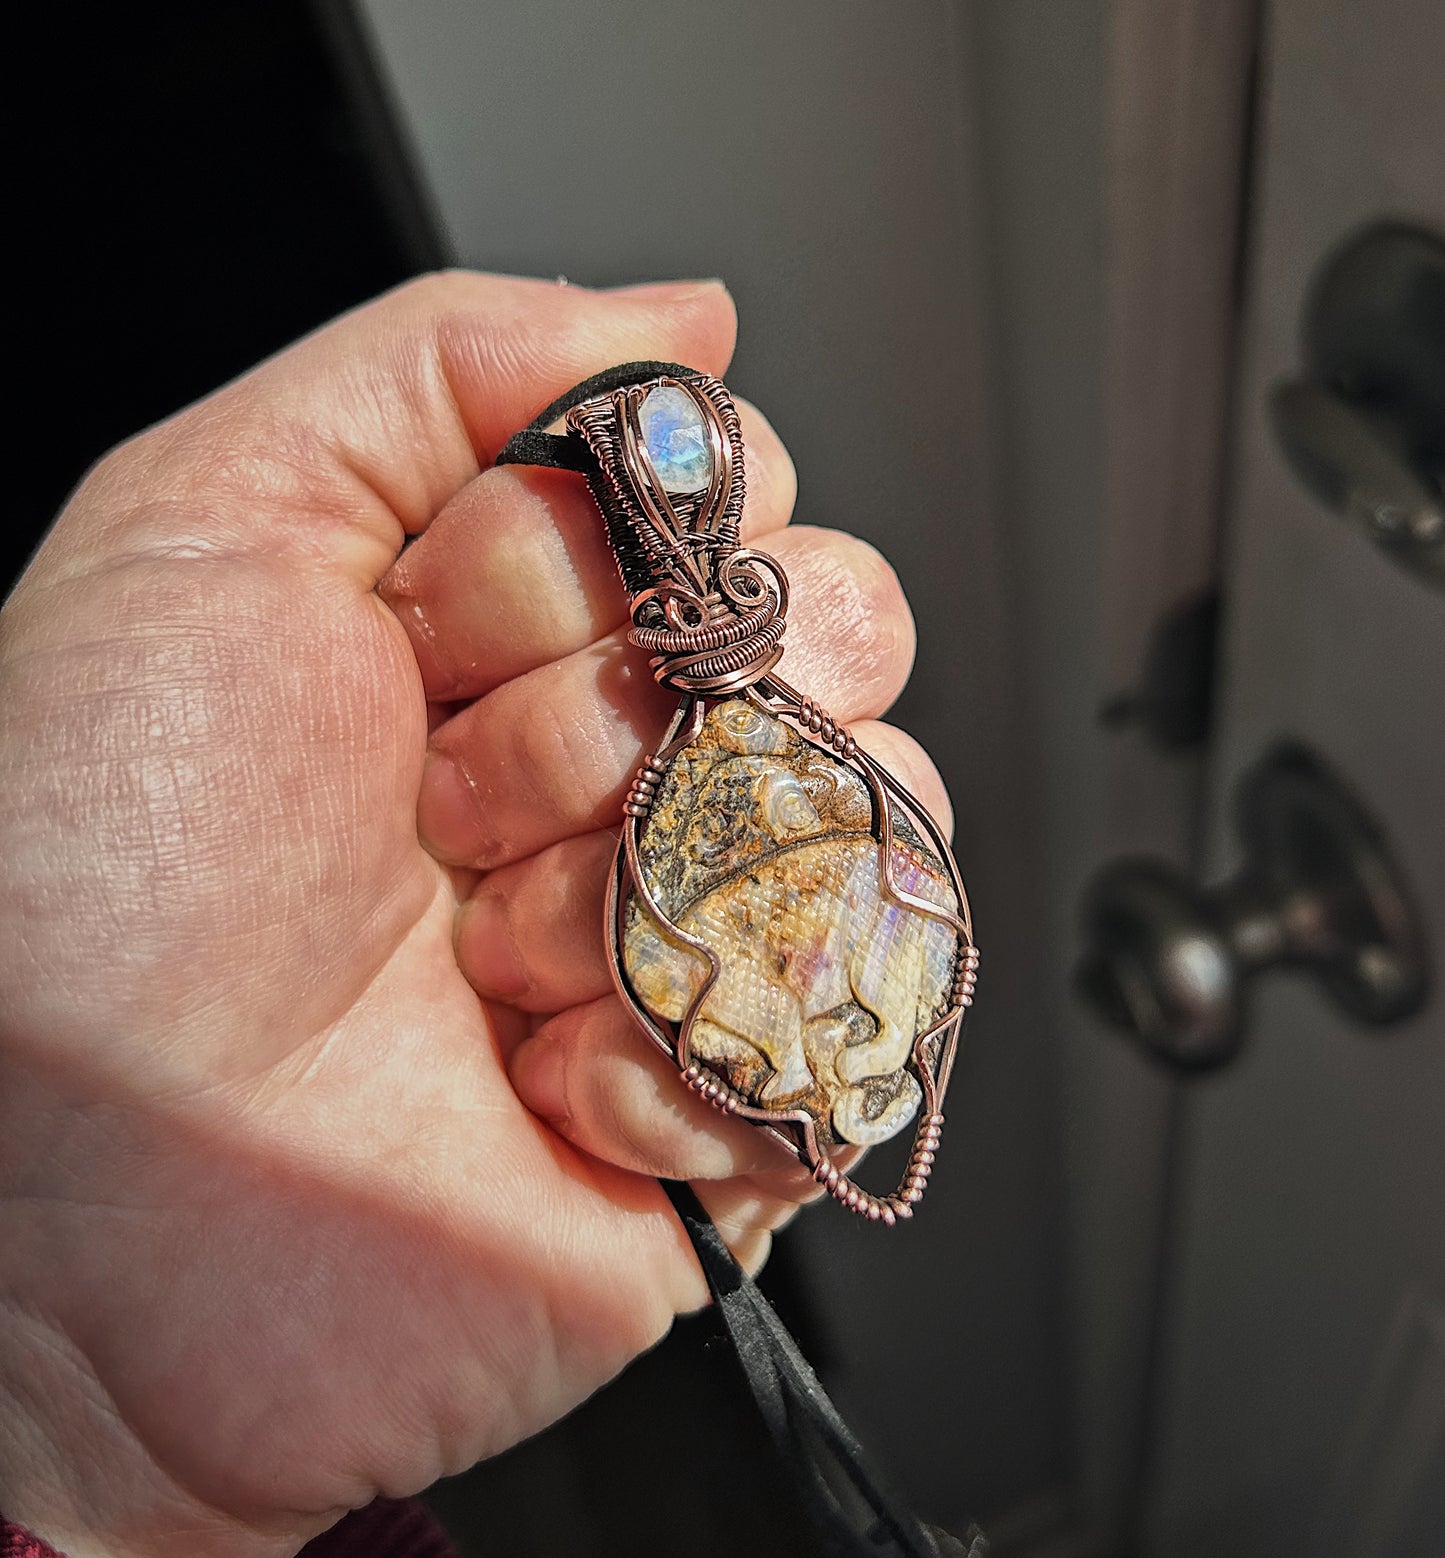 Dinosaur carved boulder opal stone pendant with moonstone accent in bale